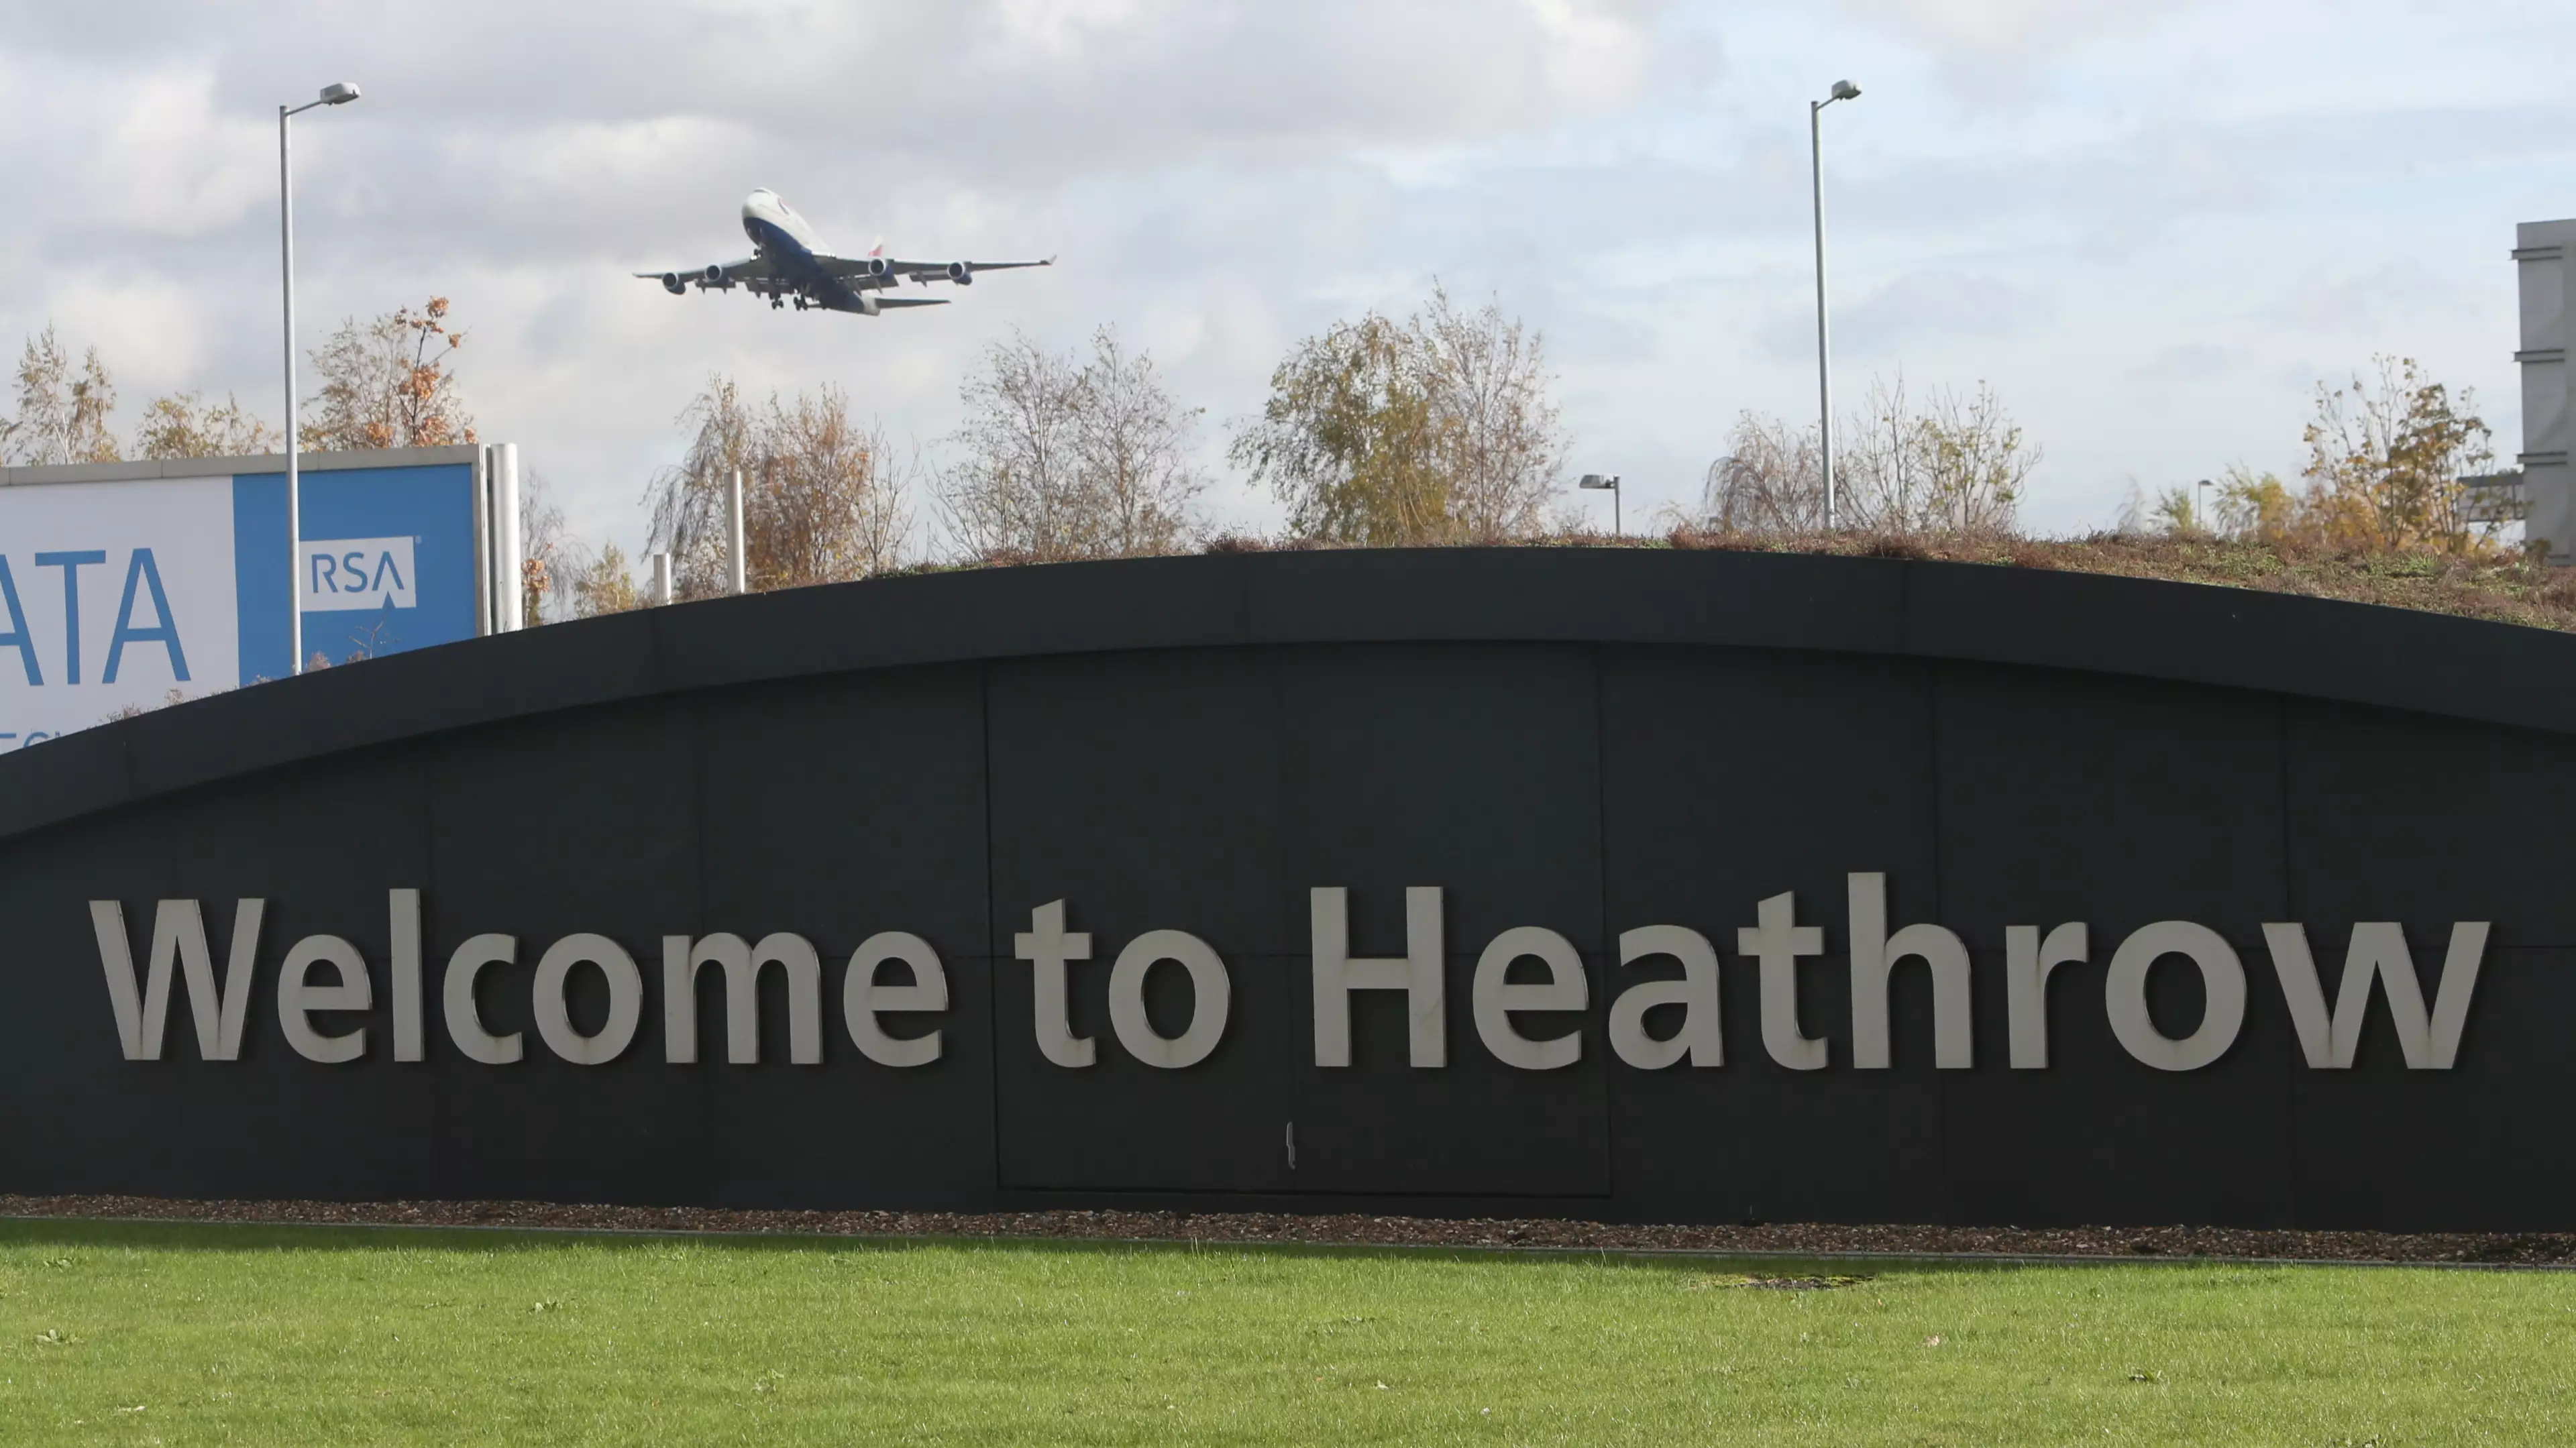 Heathrow To Install New Scanners So Liquids Can Stay in Hand Luggage